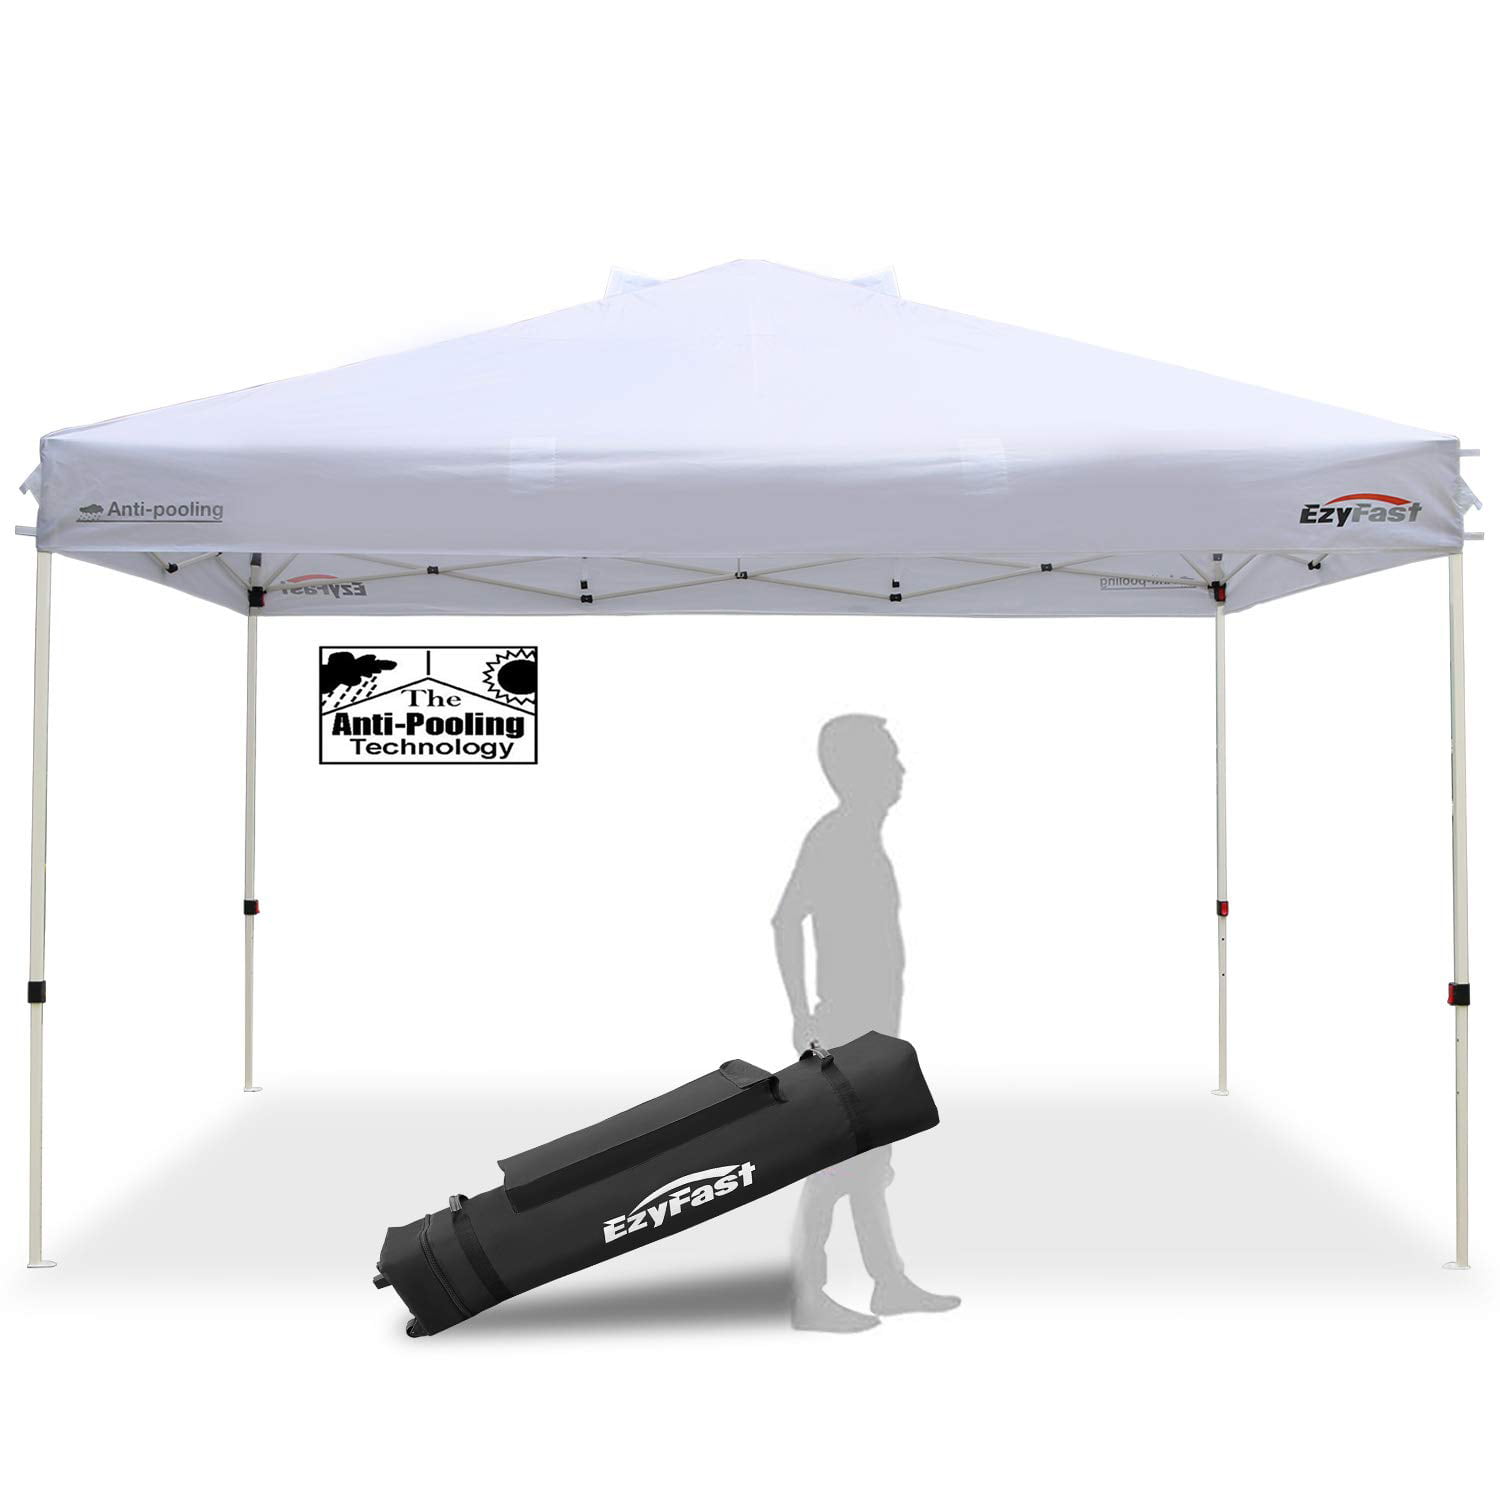 for sale online Ezyfast 14 X 10 Foot Pop up Canopy for Rain or Shine W// Carry Bag White